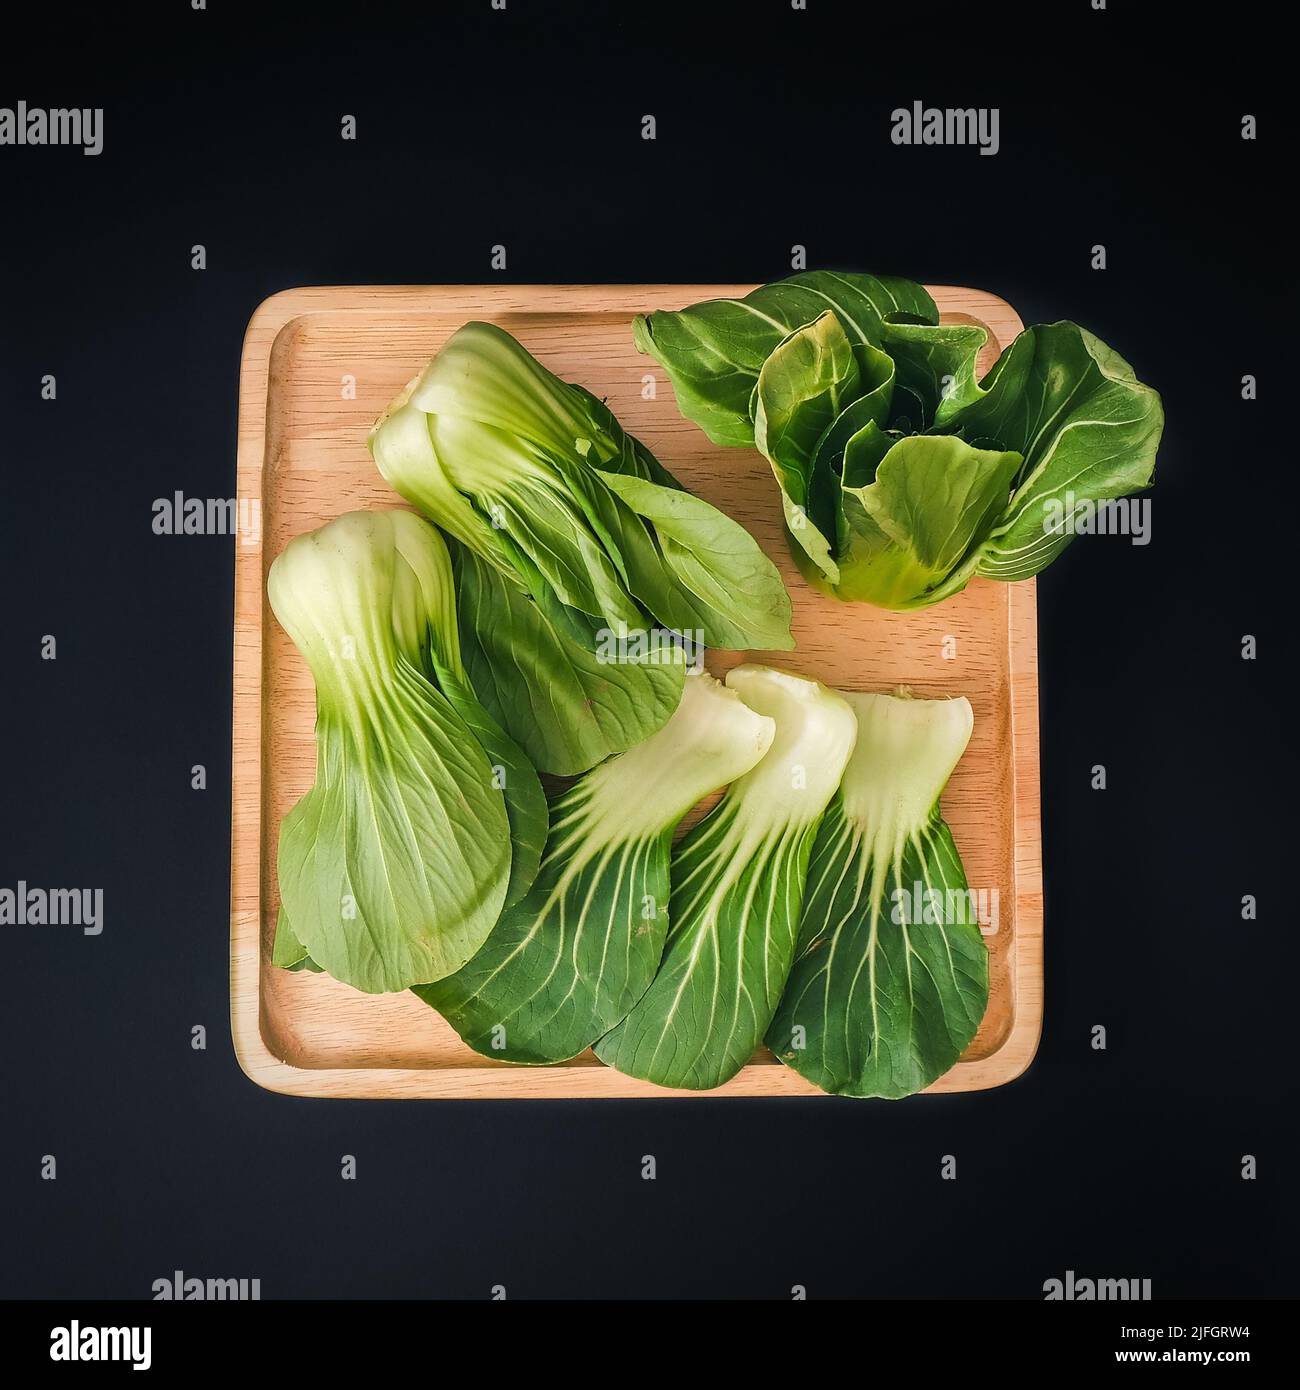 Organic green Baby Bok Choy or Brassica rapa chinensis on wooden plate on black background.  Stock Photo